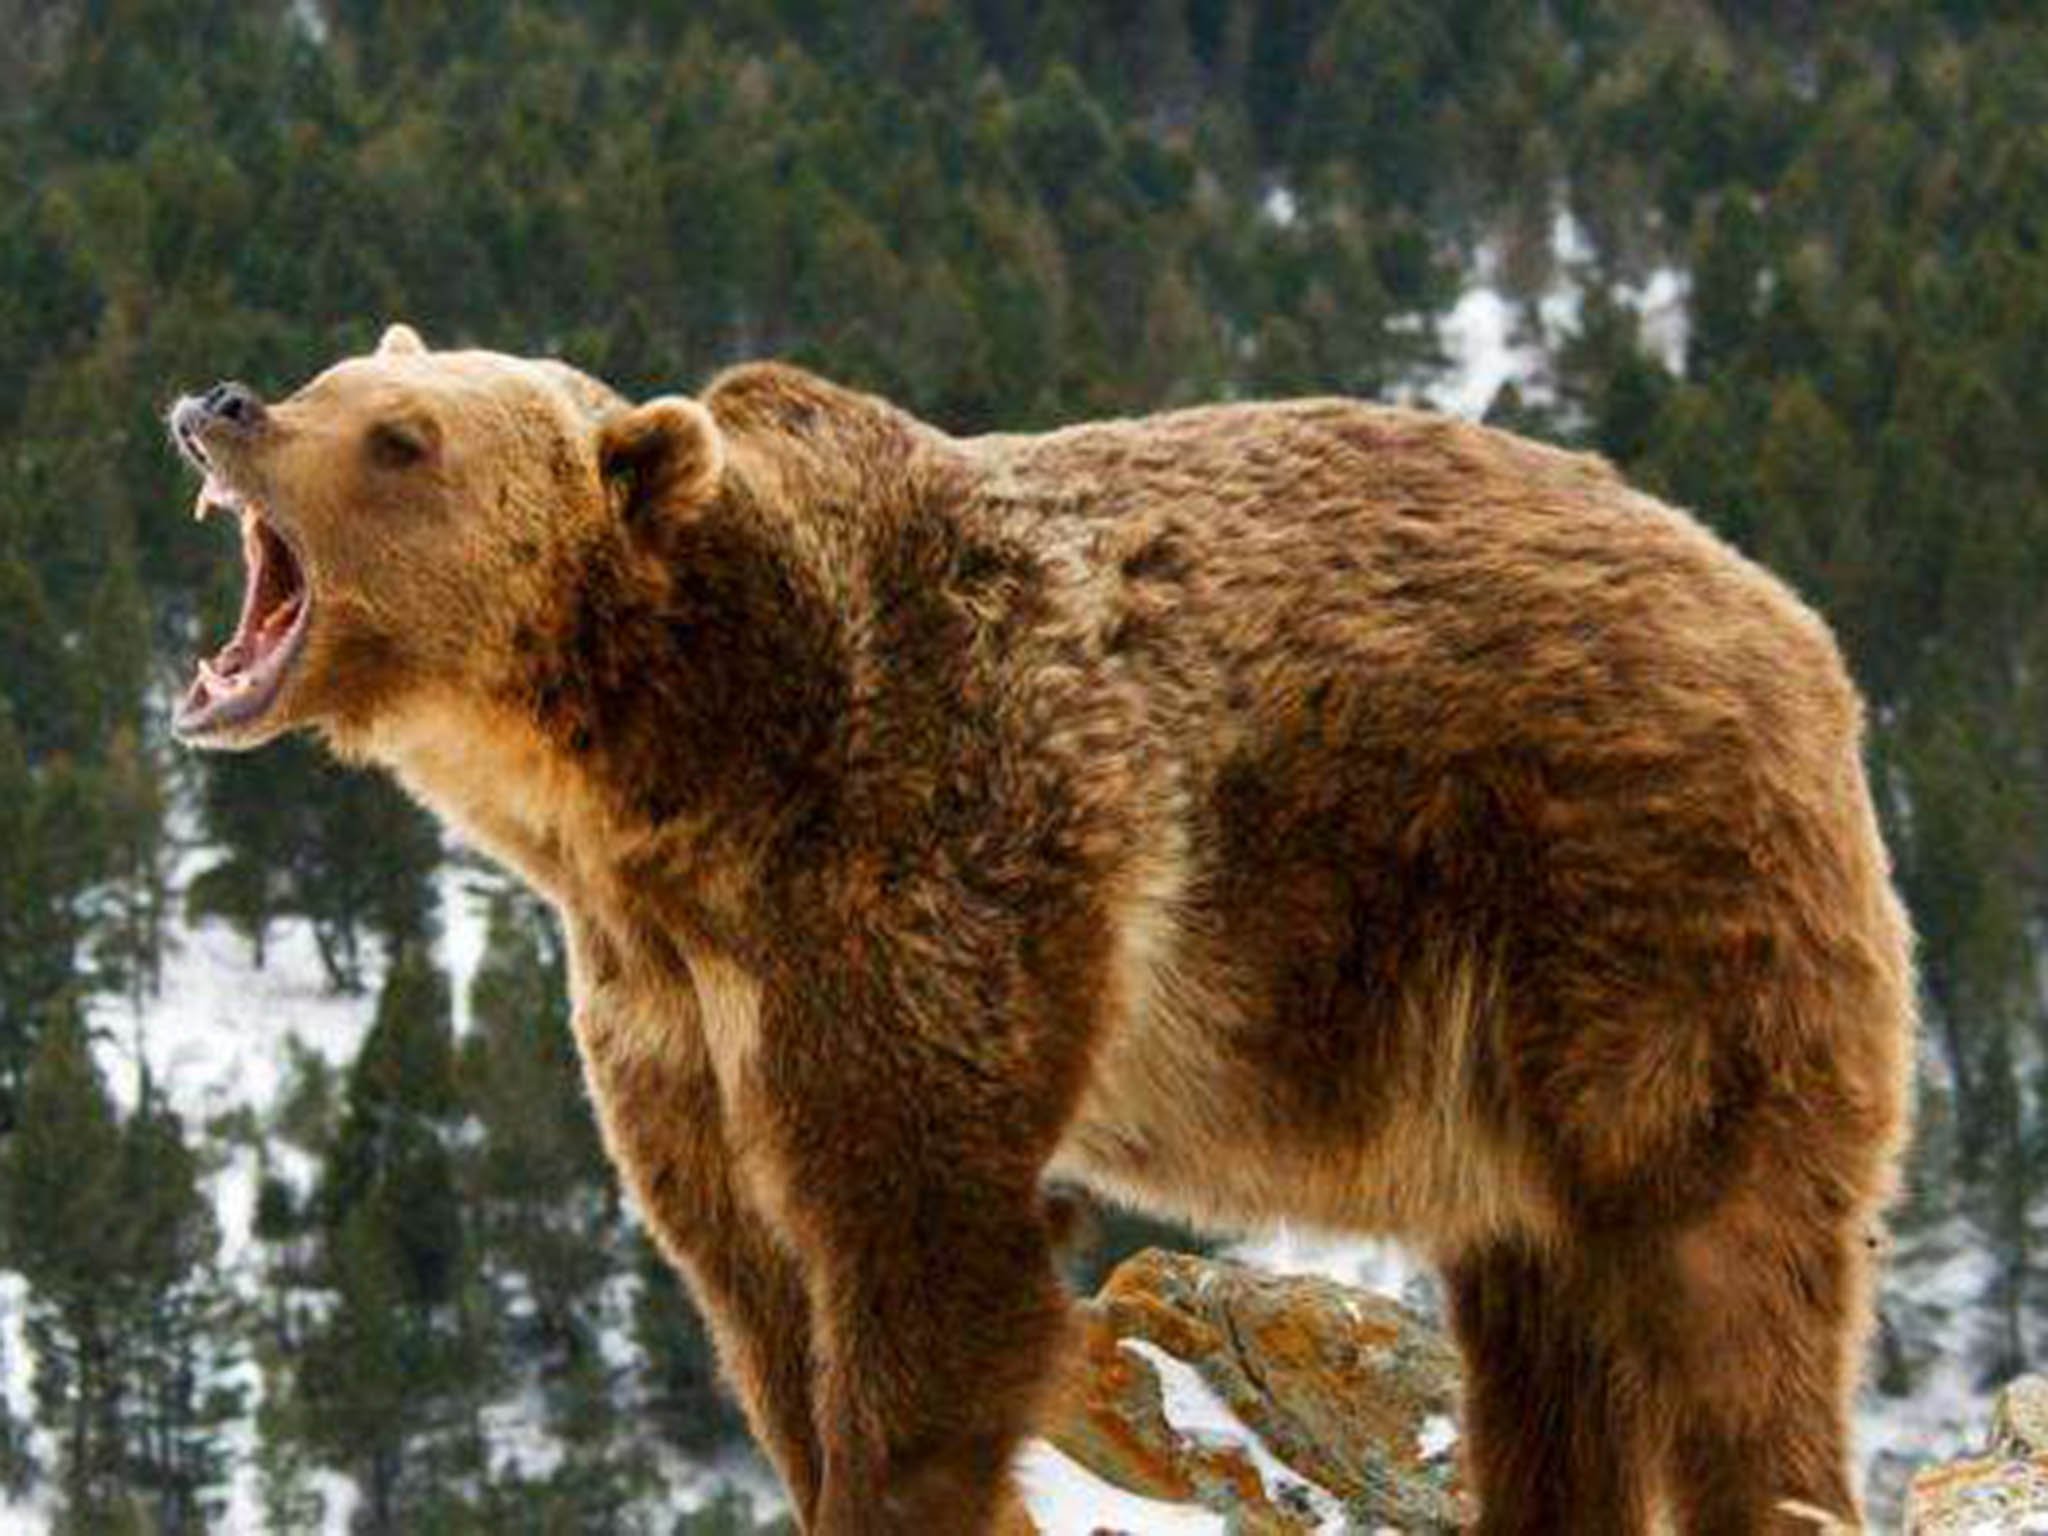 In British Colombia opponents contend that hunting kills an average of 297 bears annually